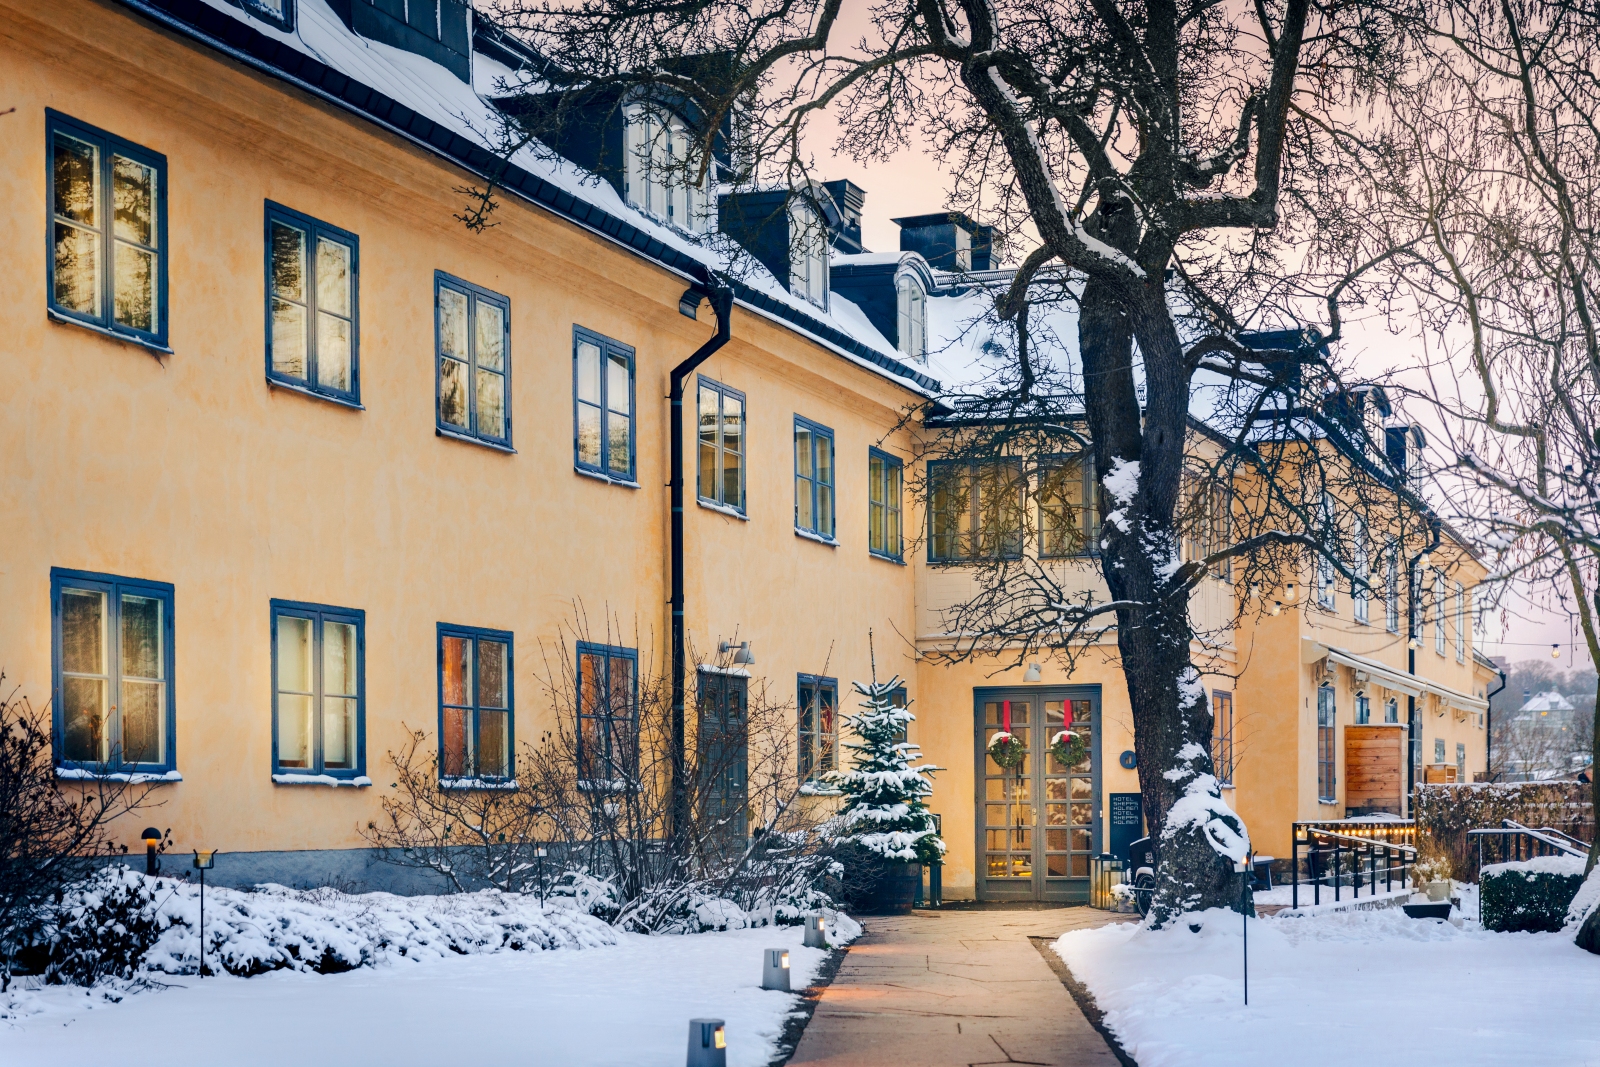 Path to the entrance of Hotel Skeppsholmen in the snow